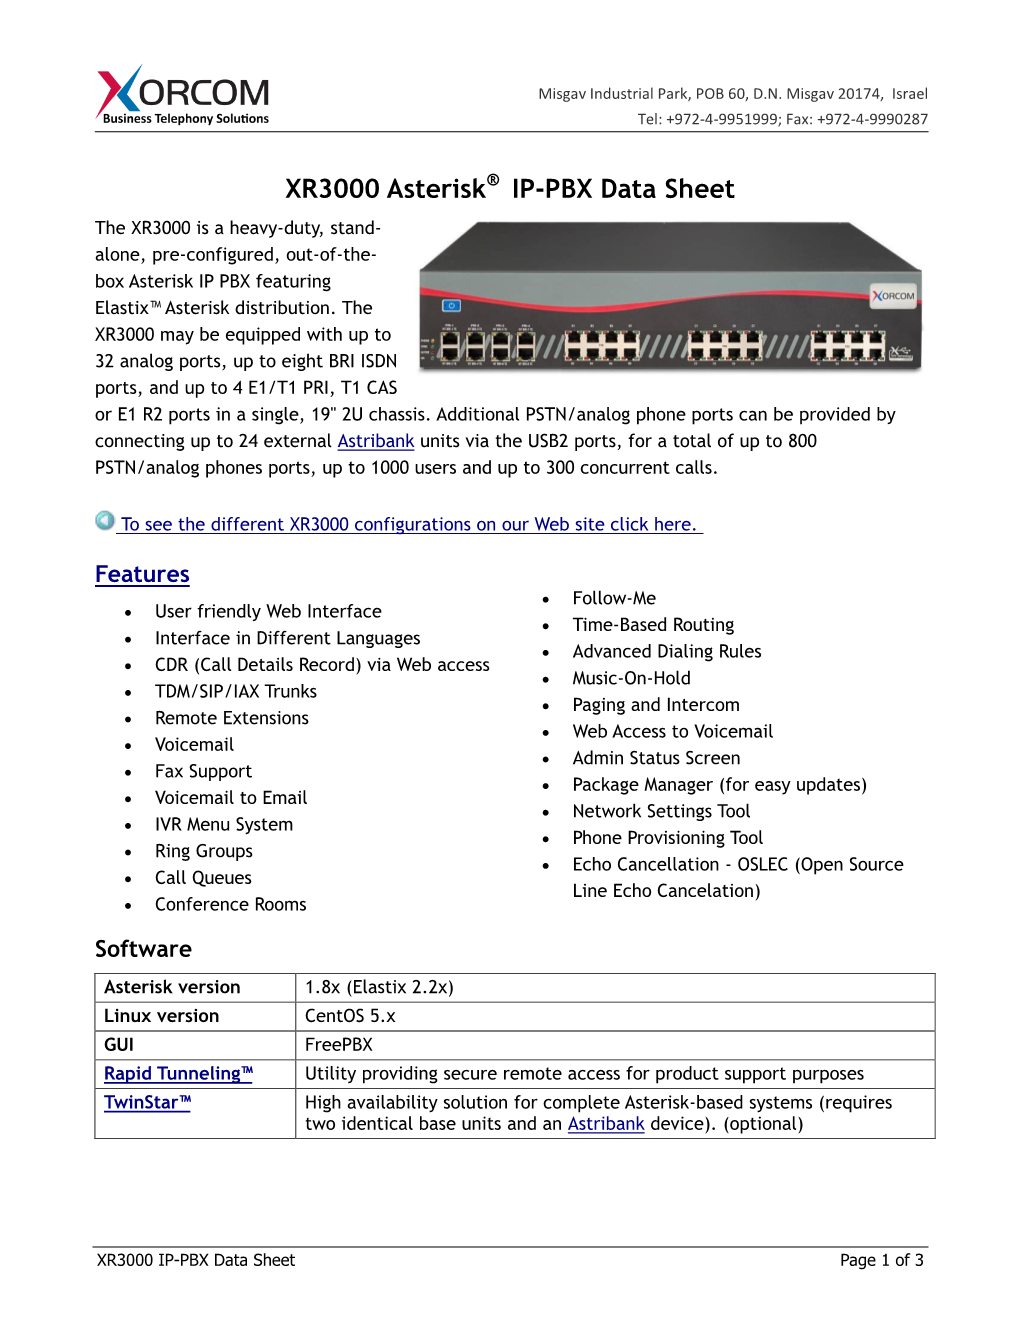 XR3000 Asterisk®I IP-PBX Data Sheet the XR3000 Is a Heavy-Duty, Stand- Alone, Pre-Configured, Out-Of-The- Box Asterisk IP PBX Featuring Elastix™ Asterisk Distribution